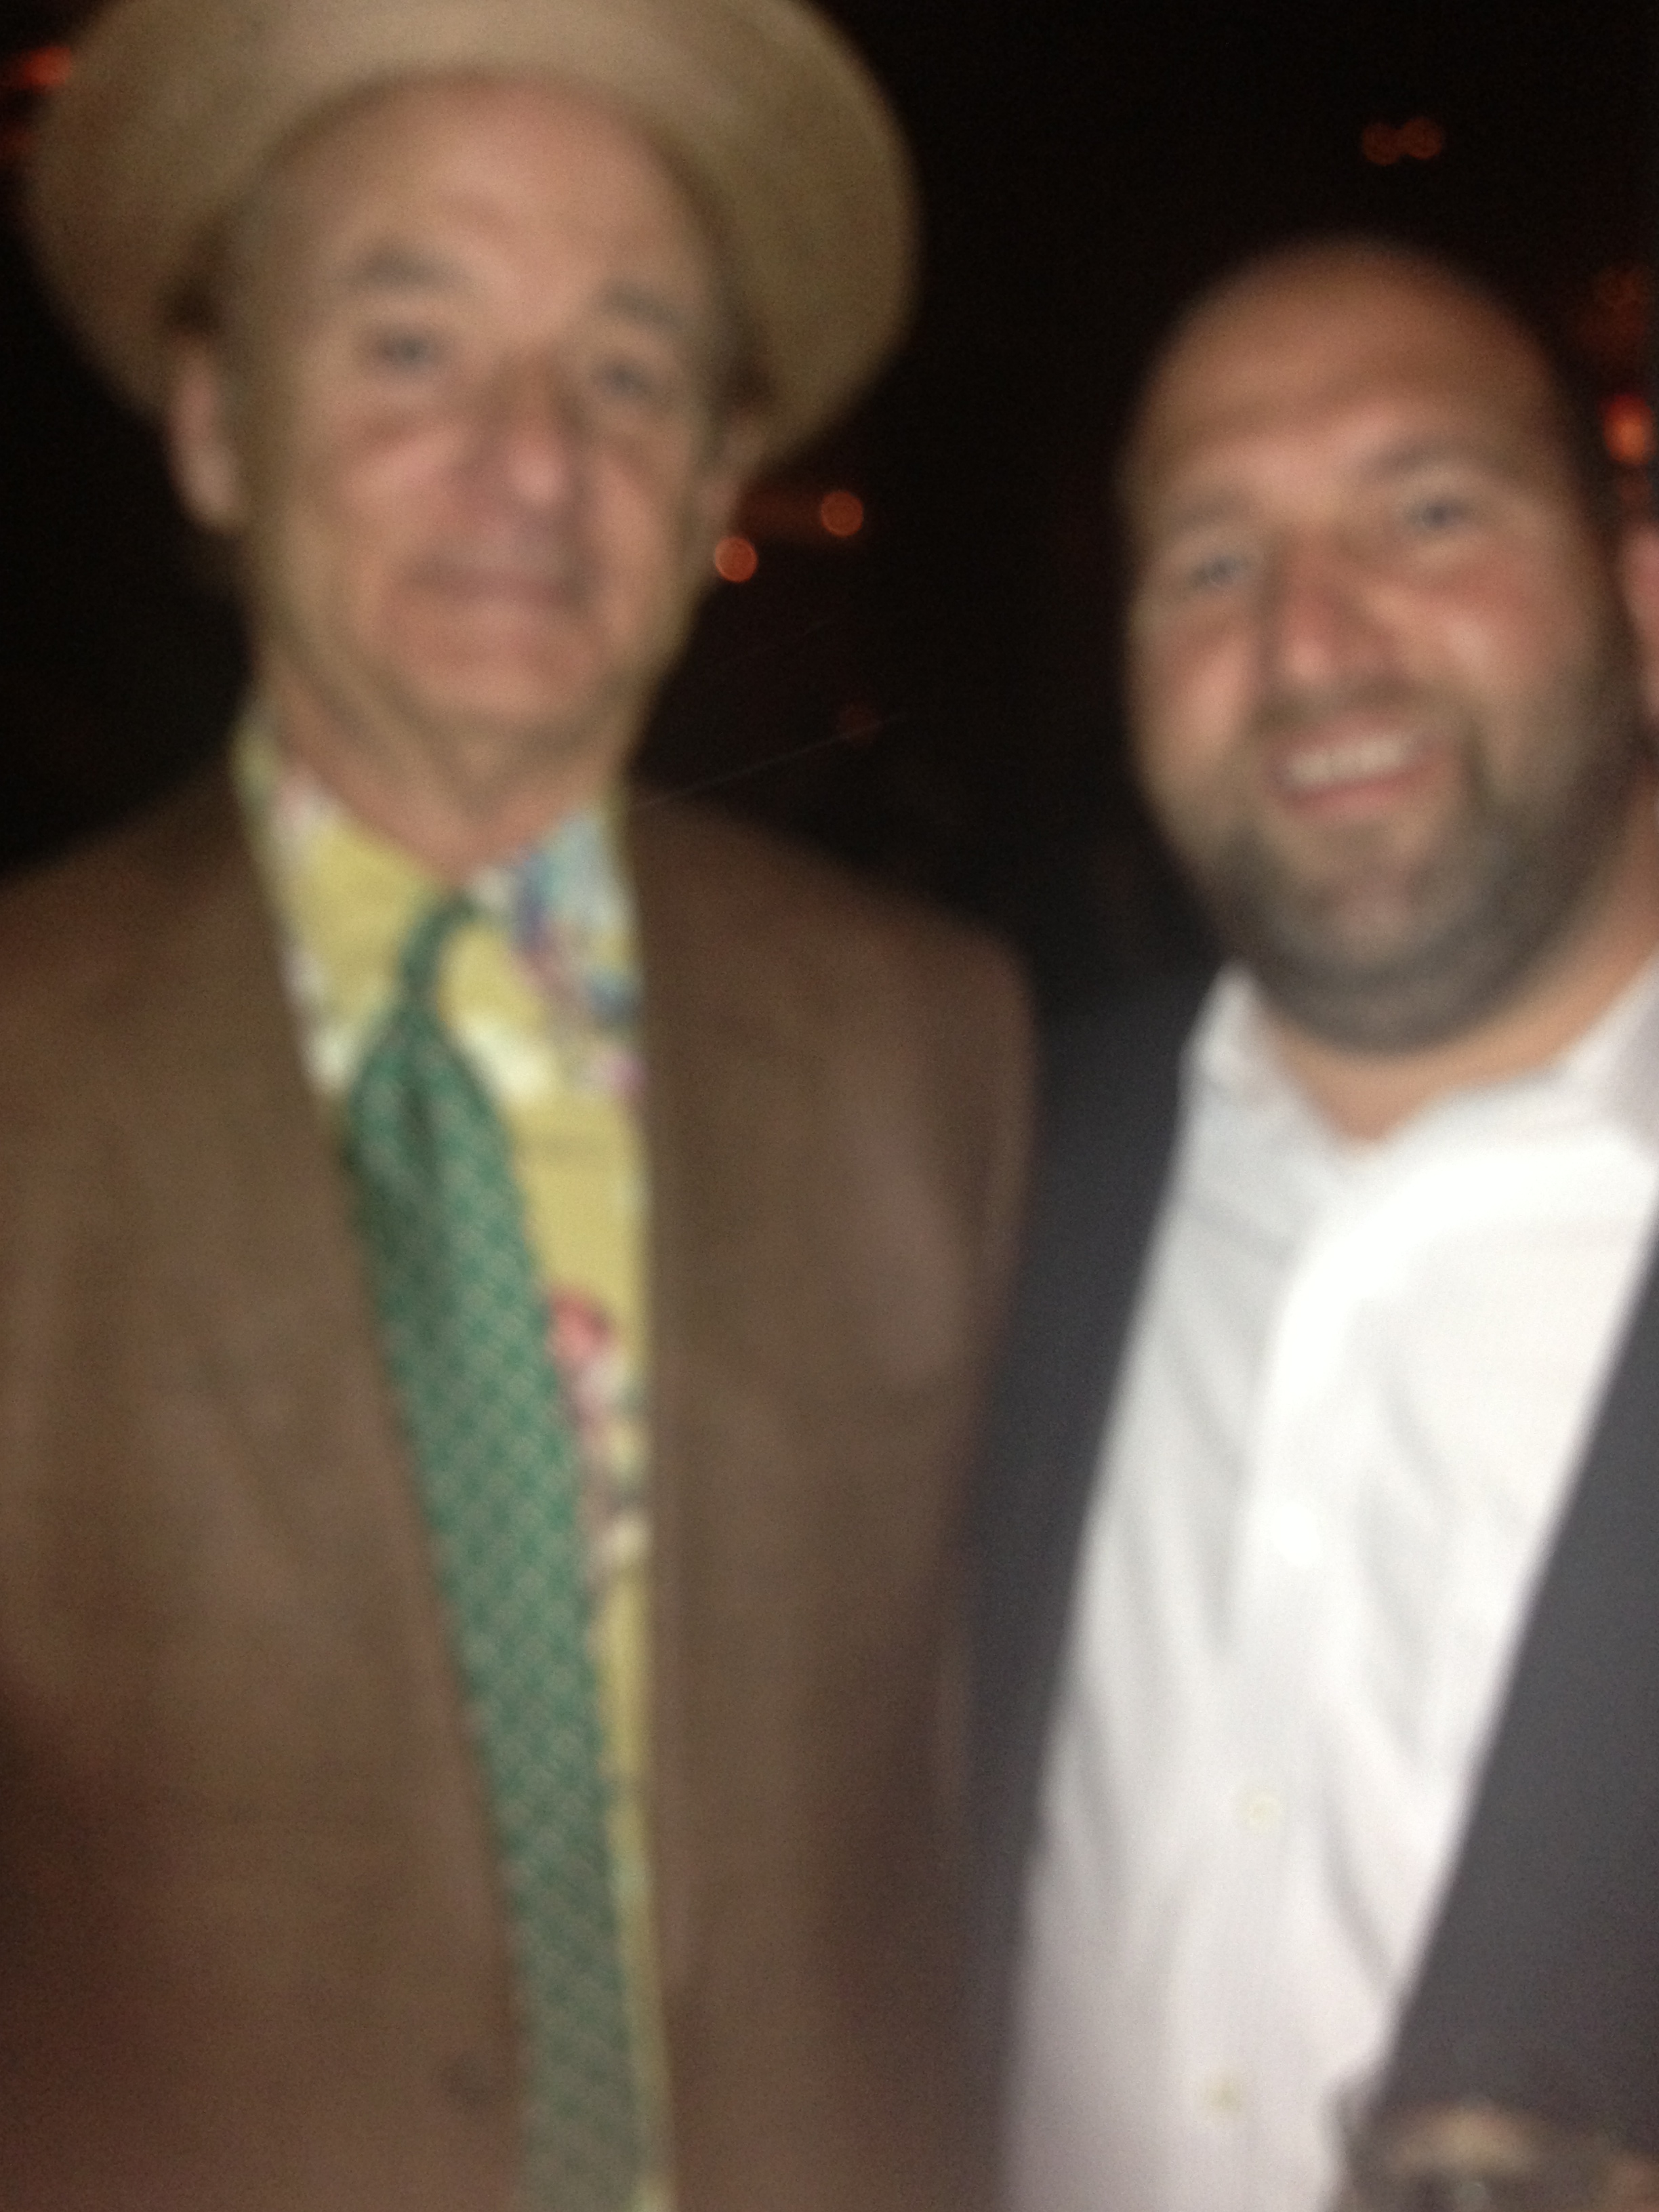 At NY premiere of St. Vincent with Bill Murray.